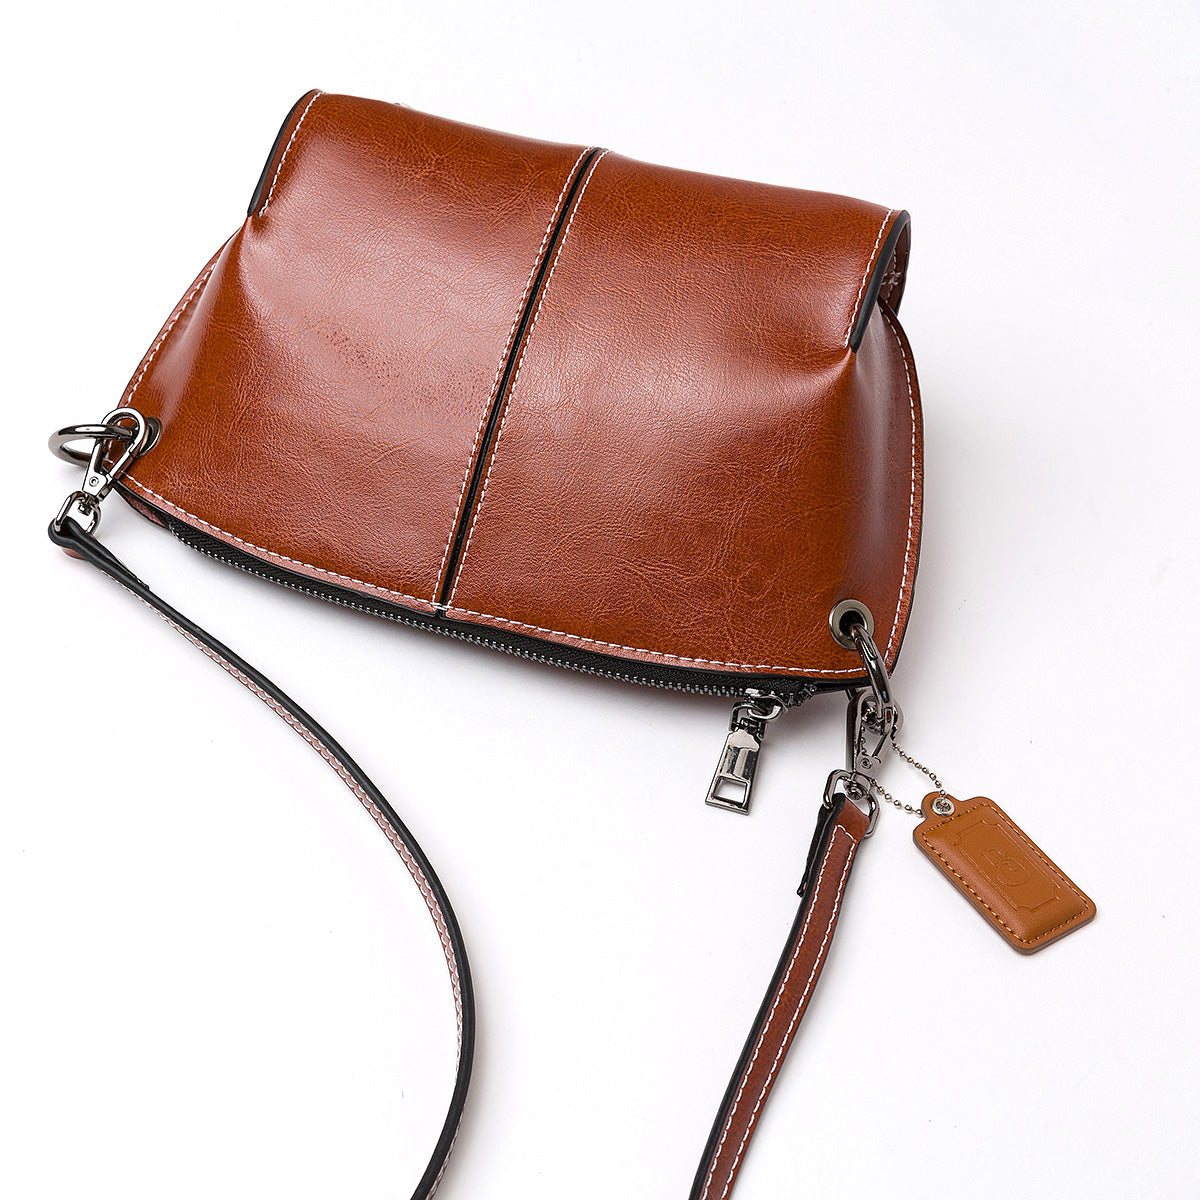 Chatou Structured Crossbody Bag